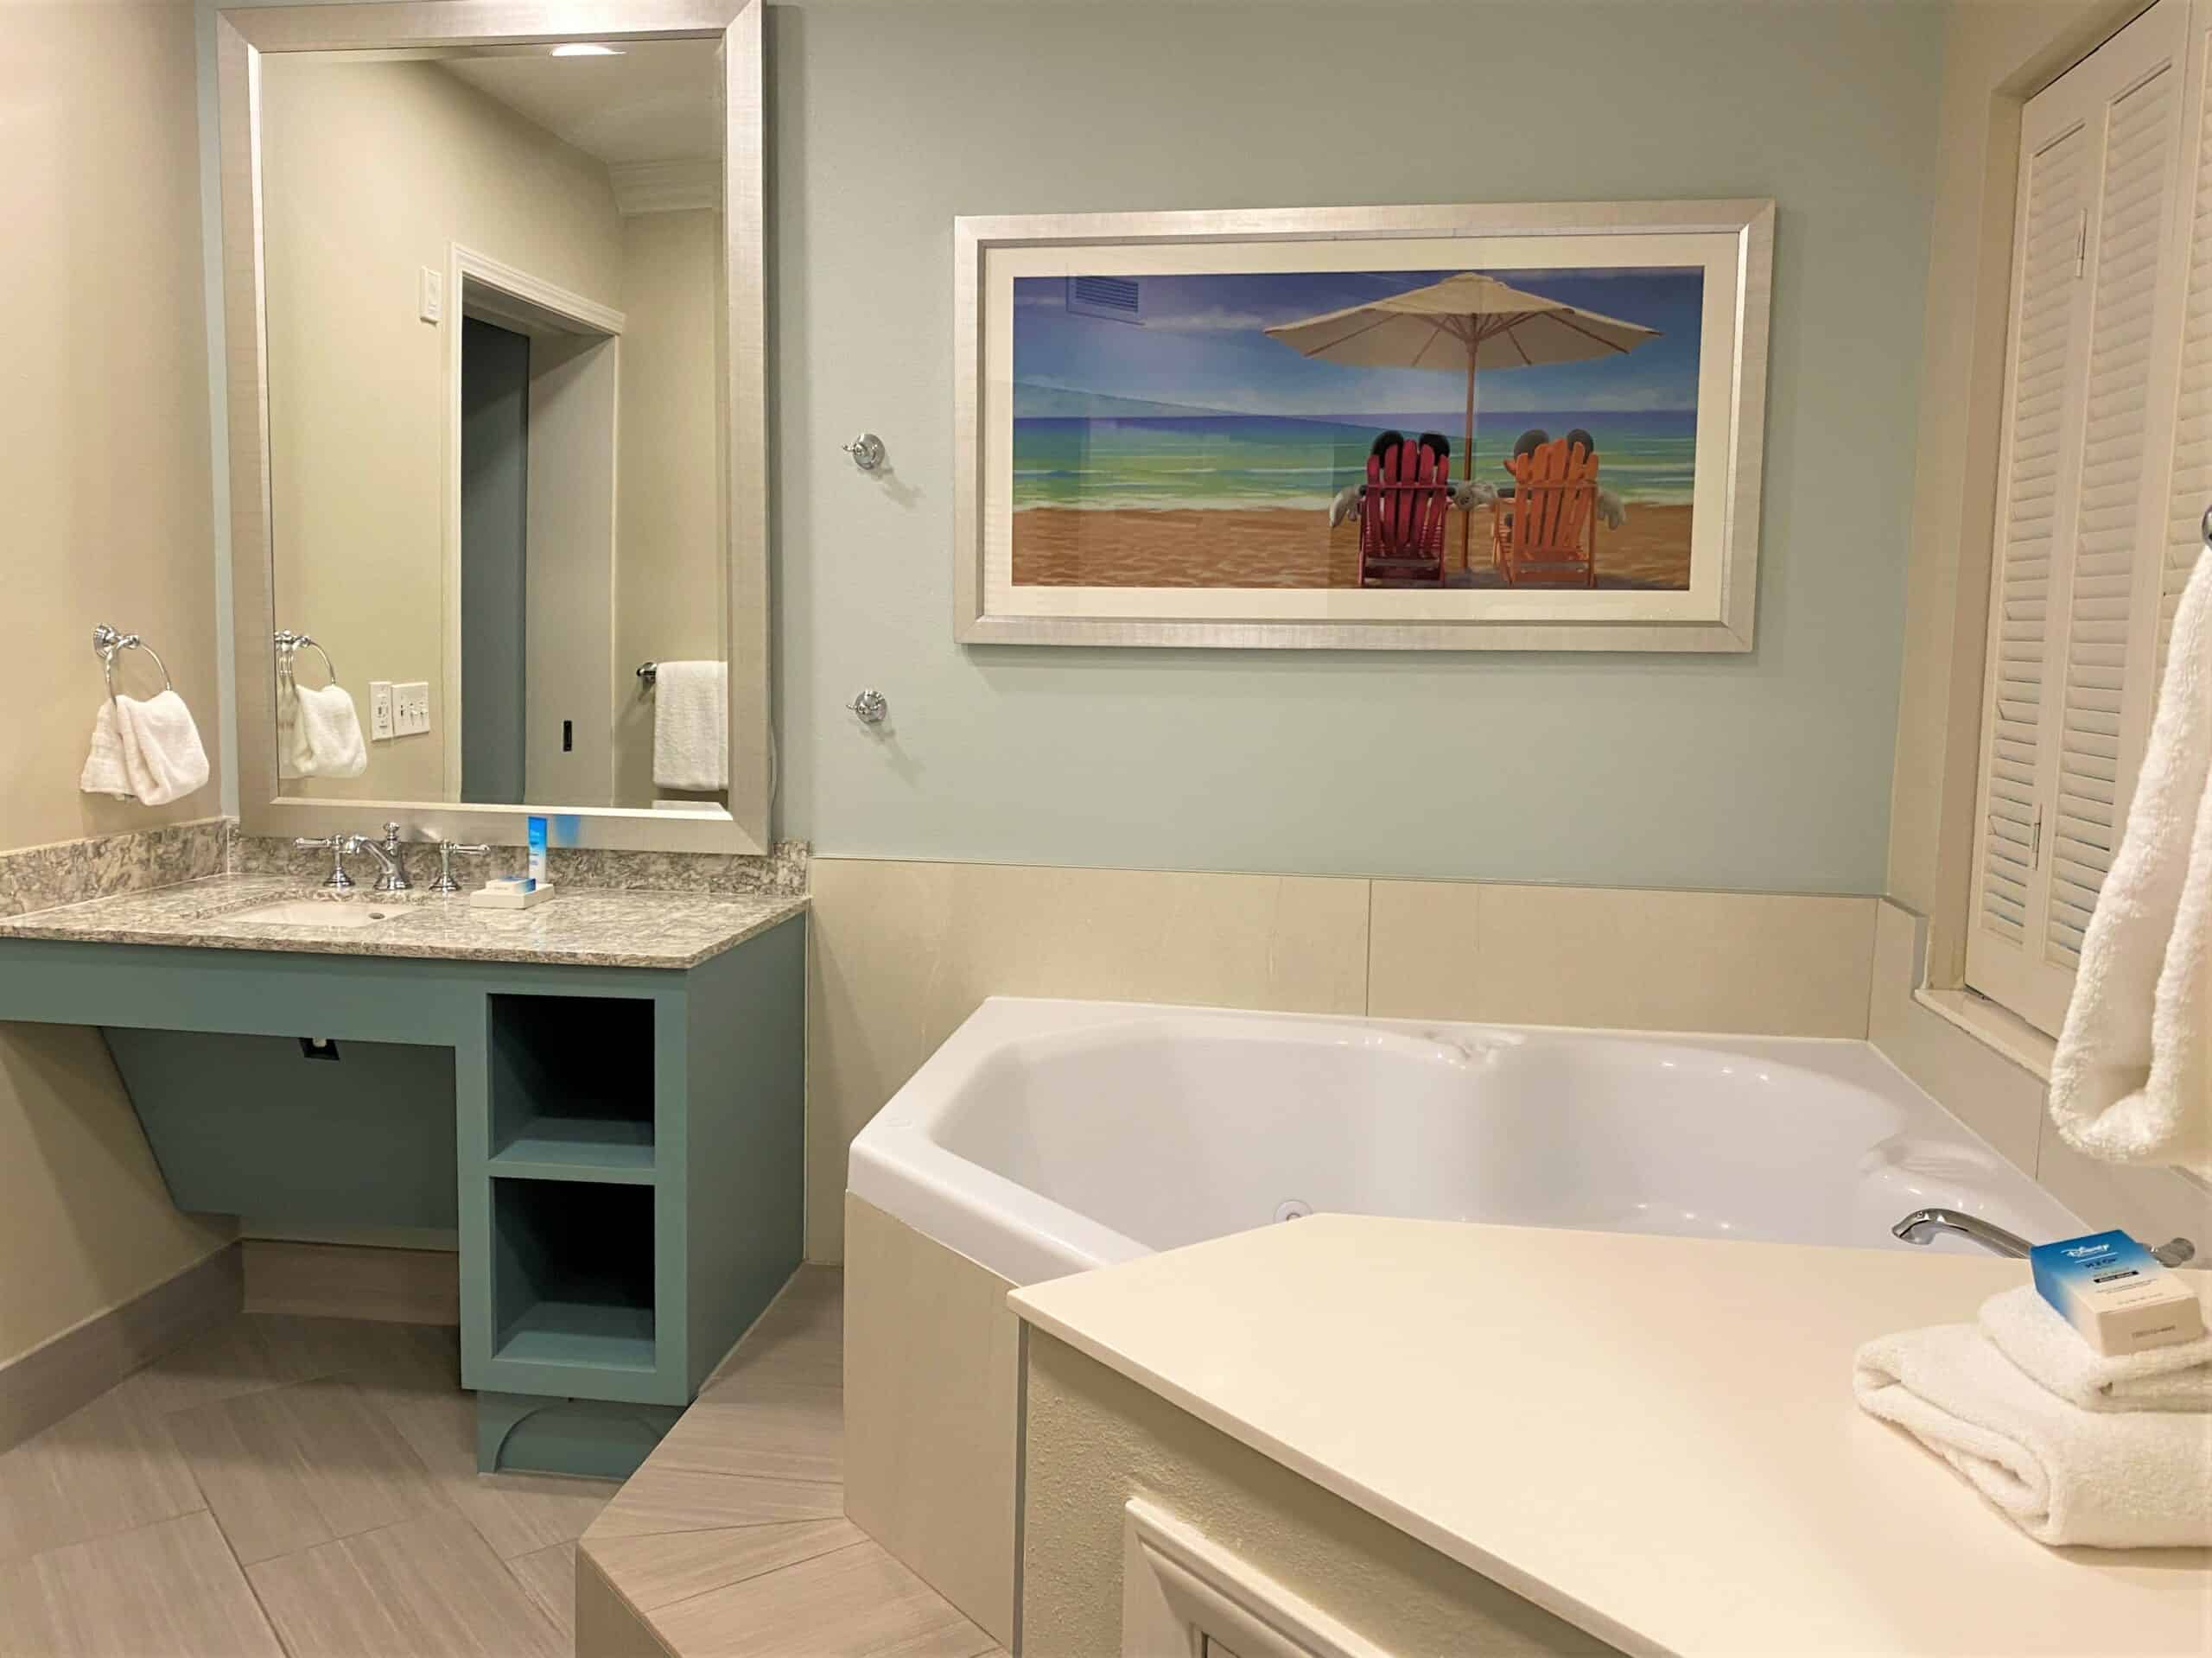 Disney's Old Key West Master Bathroom features a large soaking tub and spacious sink area with tropical touches, Mickey and Minnie on the beach wall art, and soft blue hues